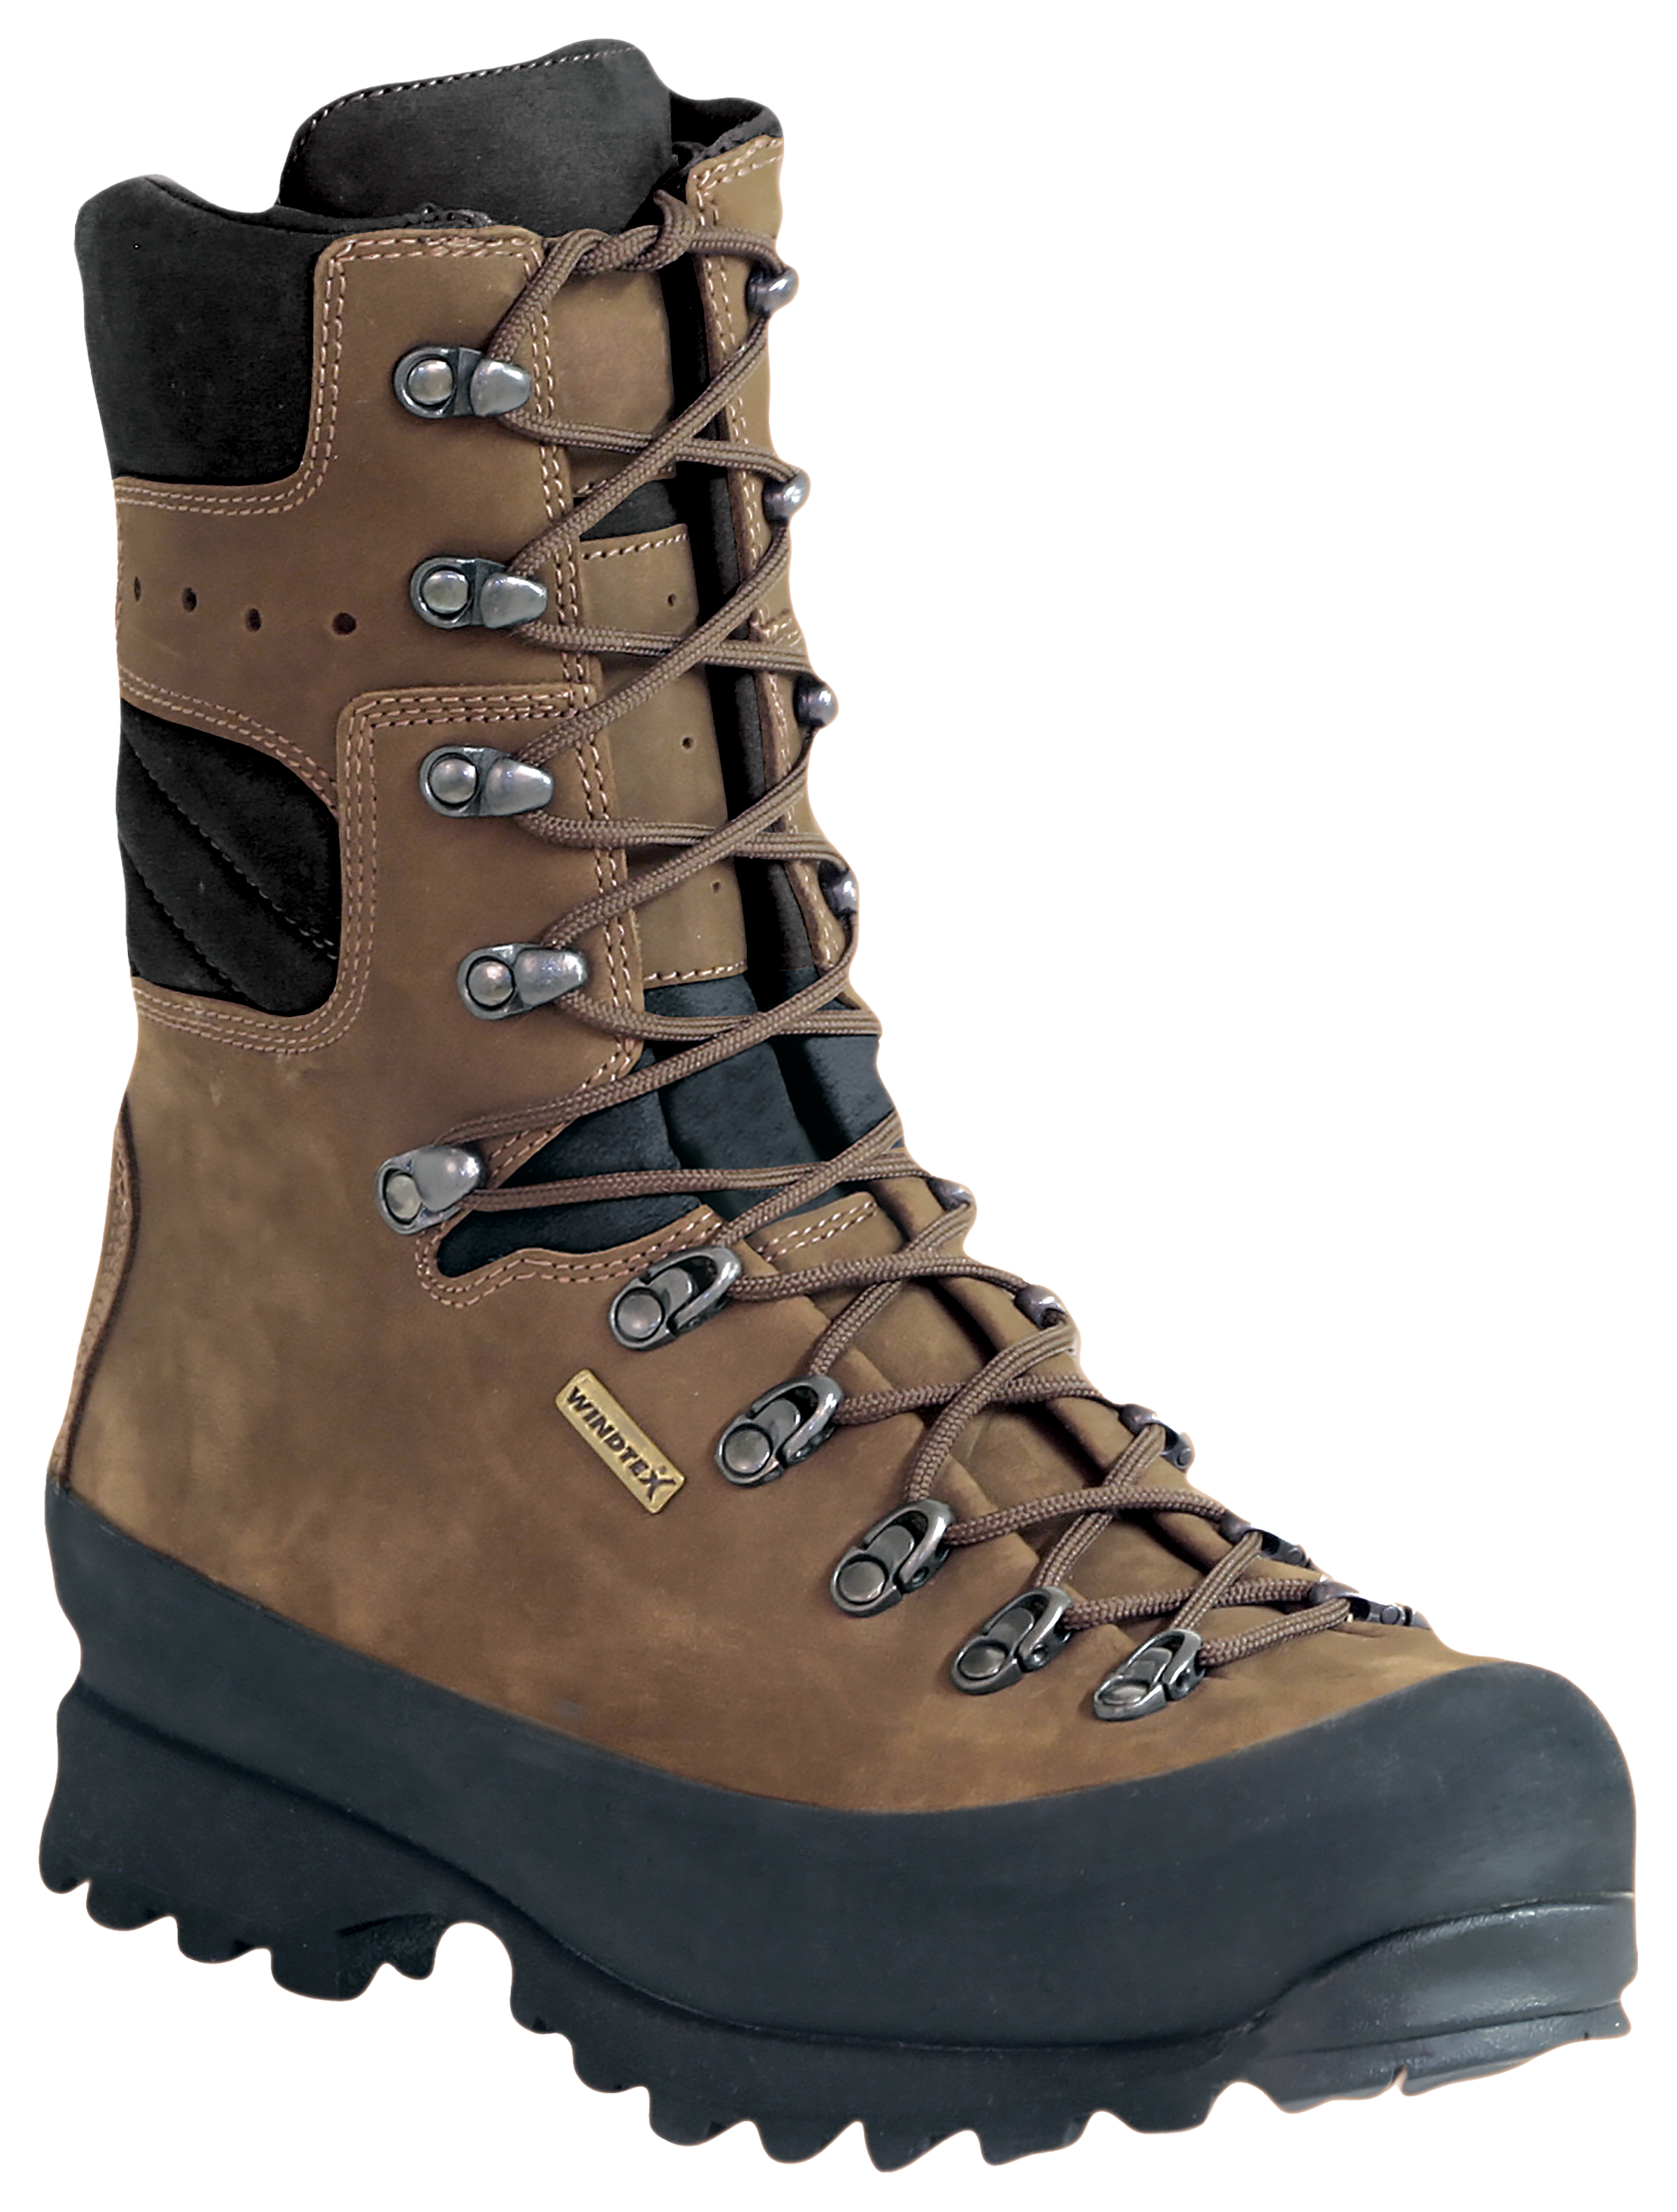 Kenetrek Mountain Extreme 1000 Insulated Waterproof Hunting Boots for Men - Brown - 8.5M